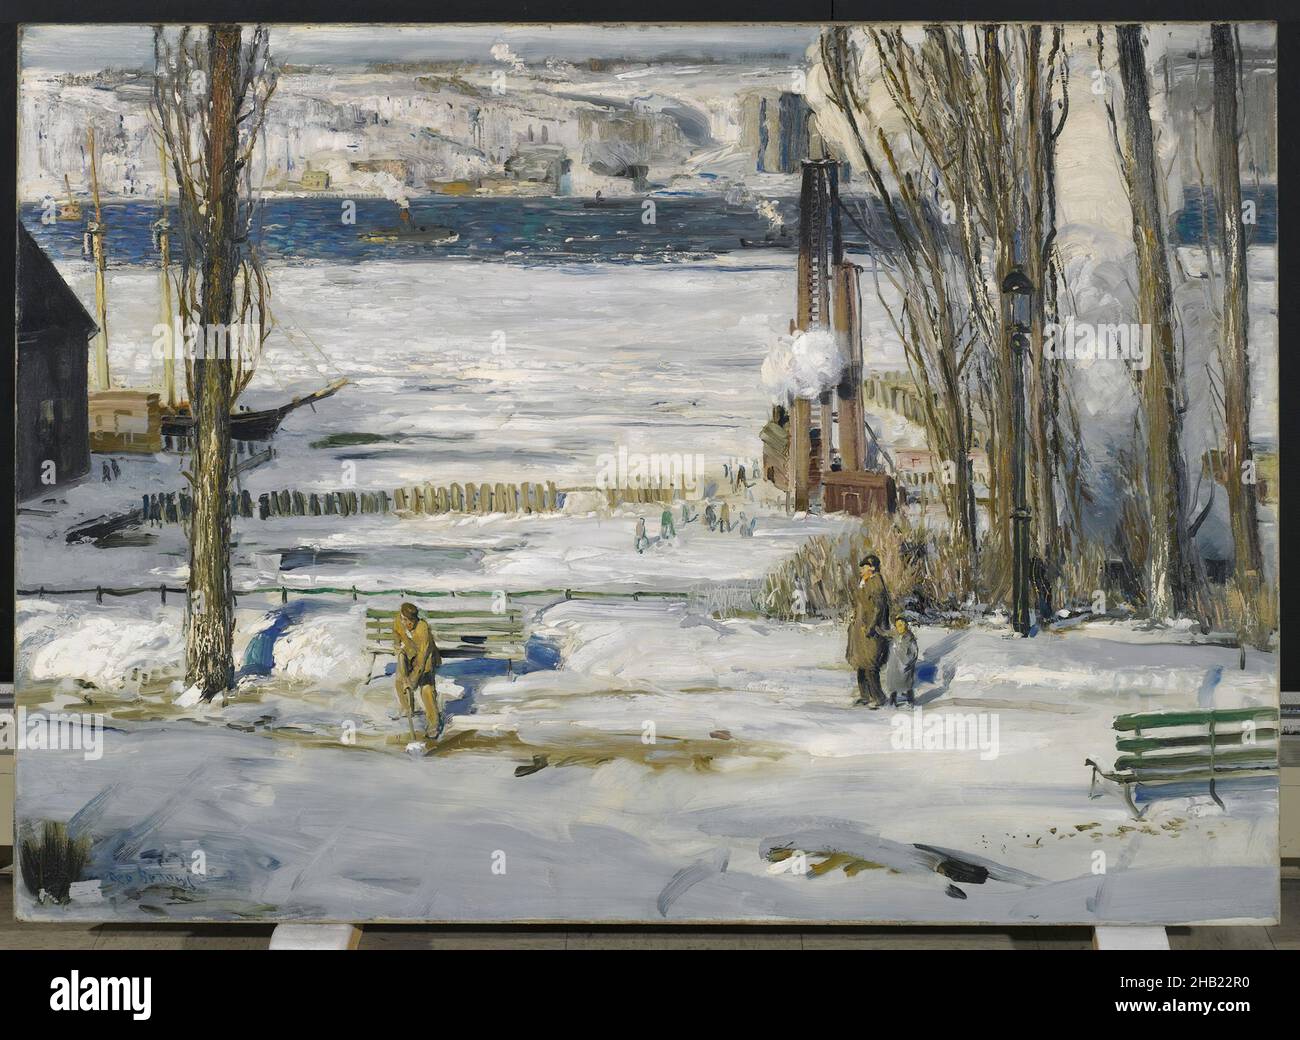 A Morning Snow--Hudson River, George Wesley Bellows, American, 1882-1925, Oil on canvas, 1910, 45 1/16 x 63 3/16 in., 114.5 x 160.5 cm, A morning snow - Hudson River, American, American artist, American painting, American realism, Ashcan School, Bellows, bench, benches, boat, Ca.1910, George Wesley Bellows, Hudson, Hudson River, Hudson River School, landscape, morning, oil, oil painting, painting, paintings, River, School, shoveling, snow, tree, water, white, winter Stock Photo